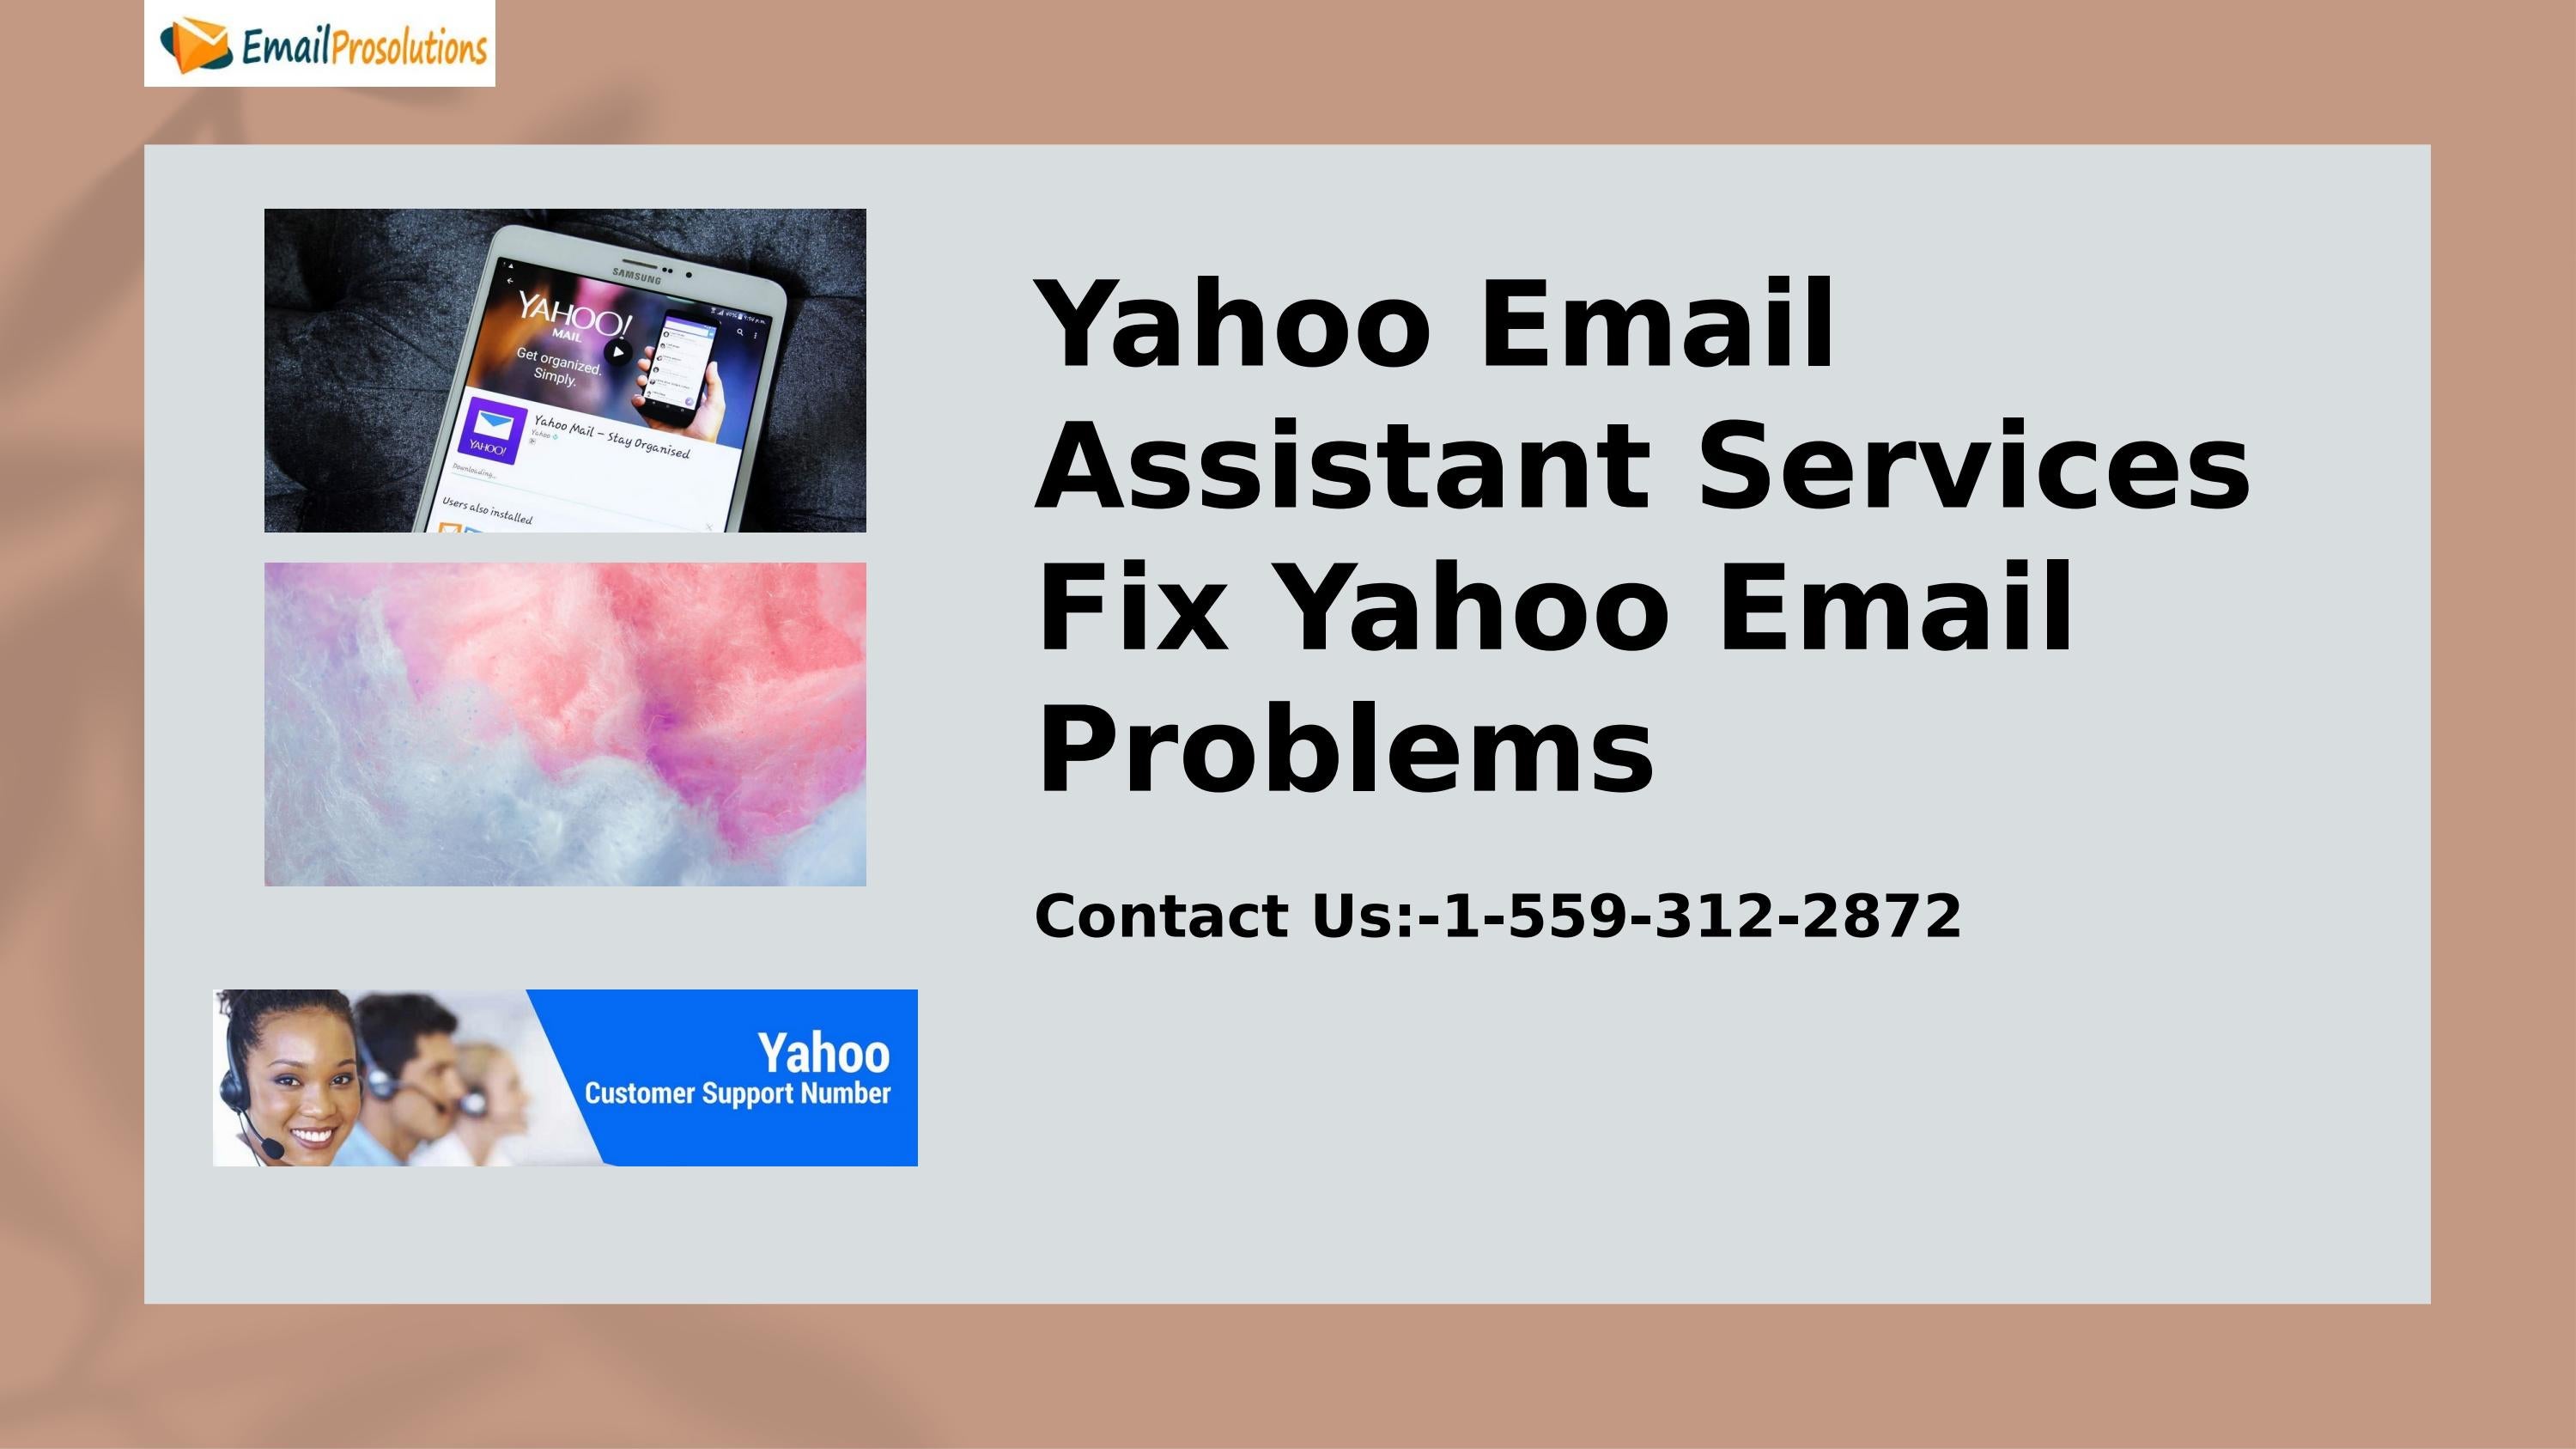 Visit the Yahoo Help Center
Search for "attachment issues" or a similar topic